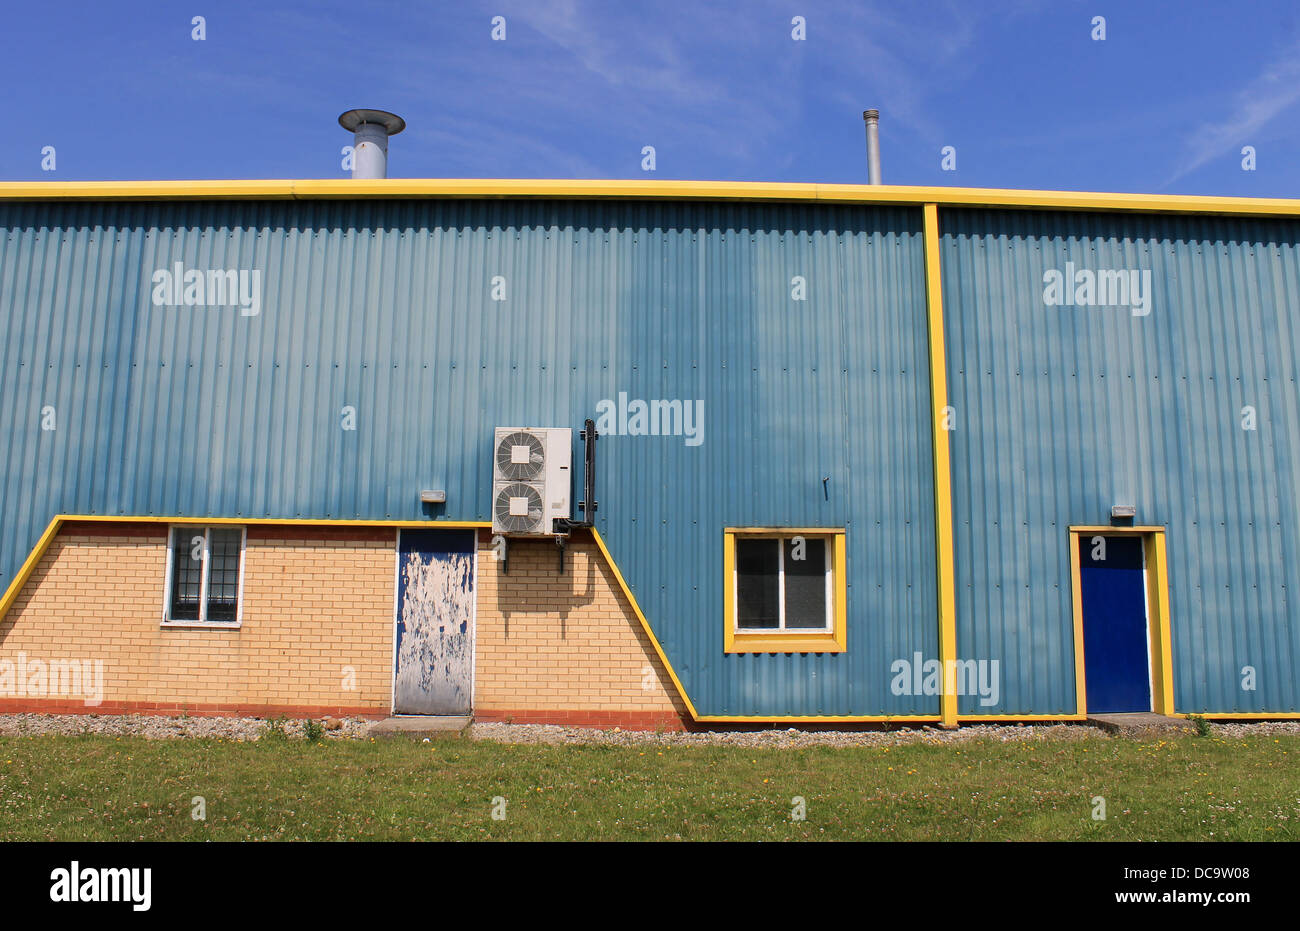 Exterior of blue and yellow warehouse building with air conditioning. Stock Photo